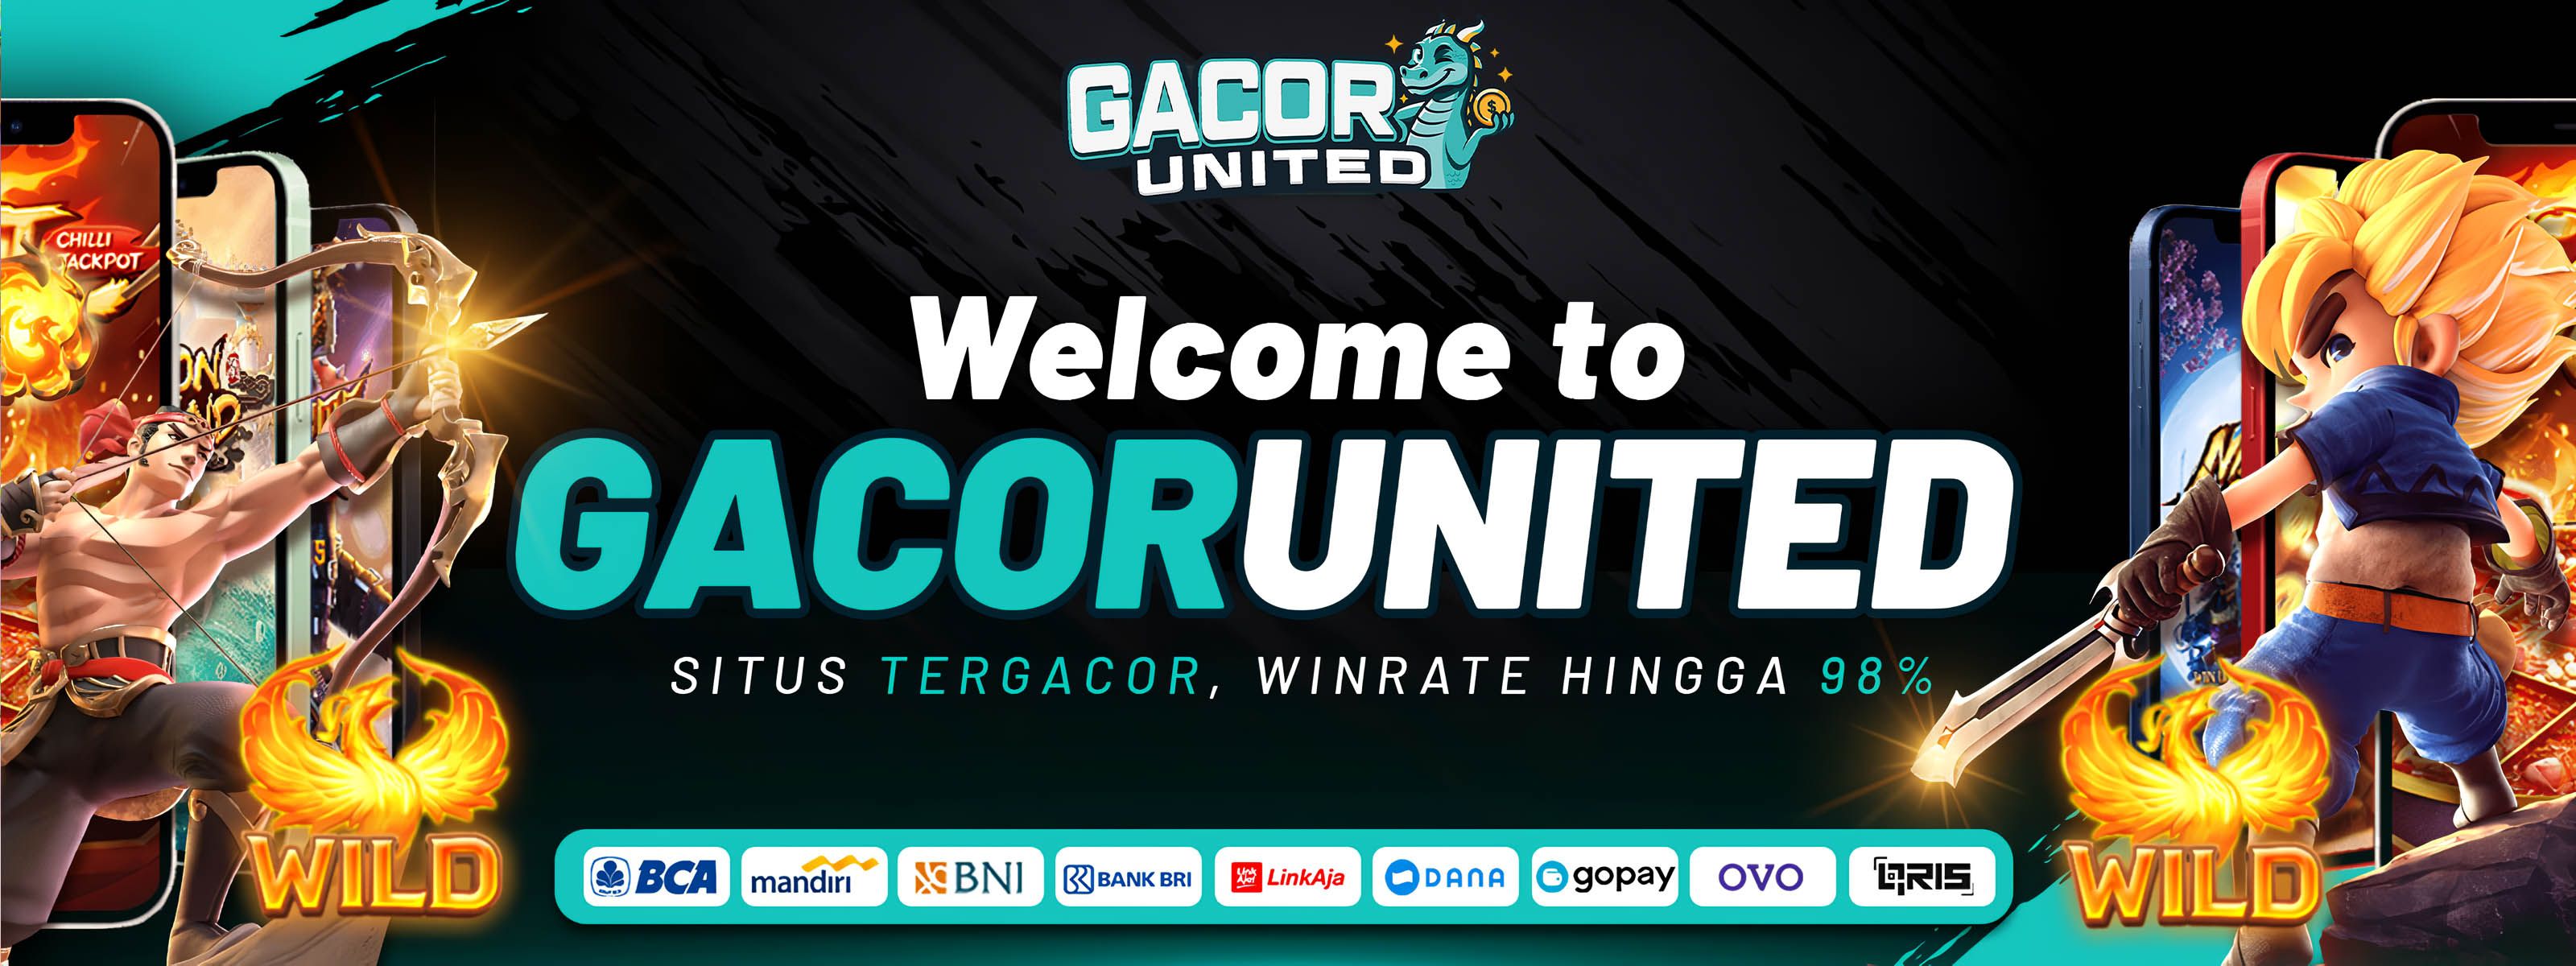 WELCOME TO GACOR UNITED